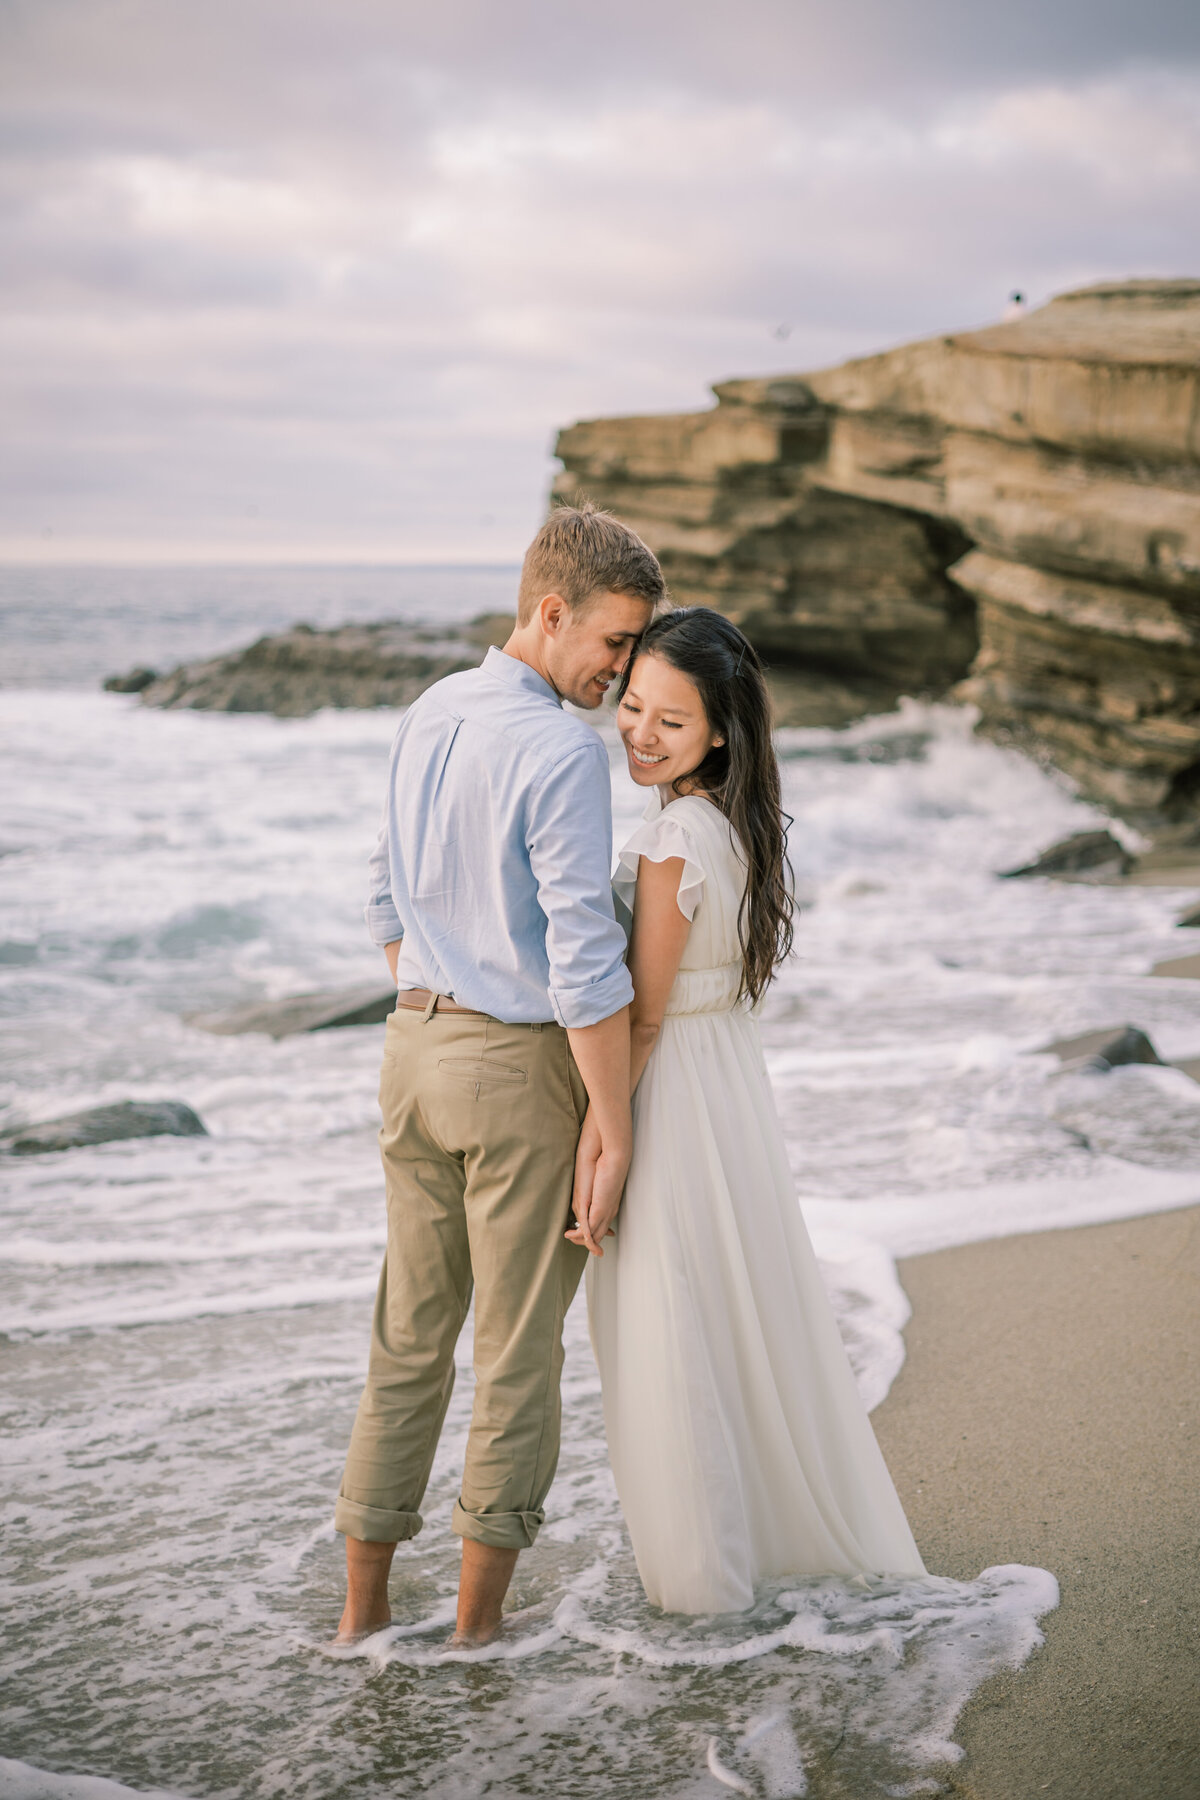 Jocelyn and Spencer Photography California Santa Barbara Wedding Engagement Luxury High End Romantic Imagery Light Airy Fineart Film Style16